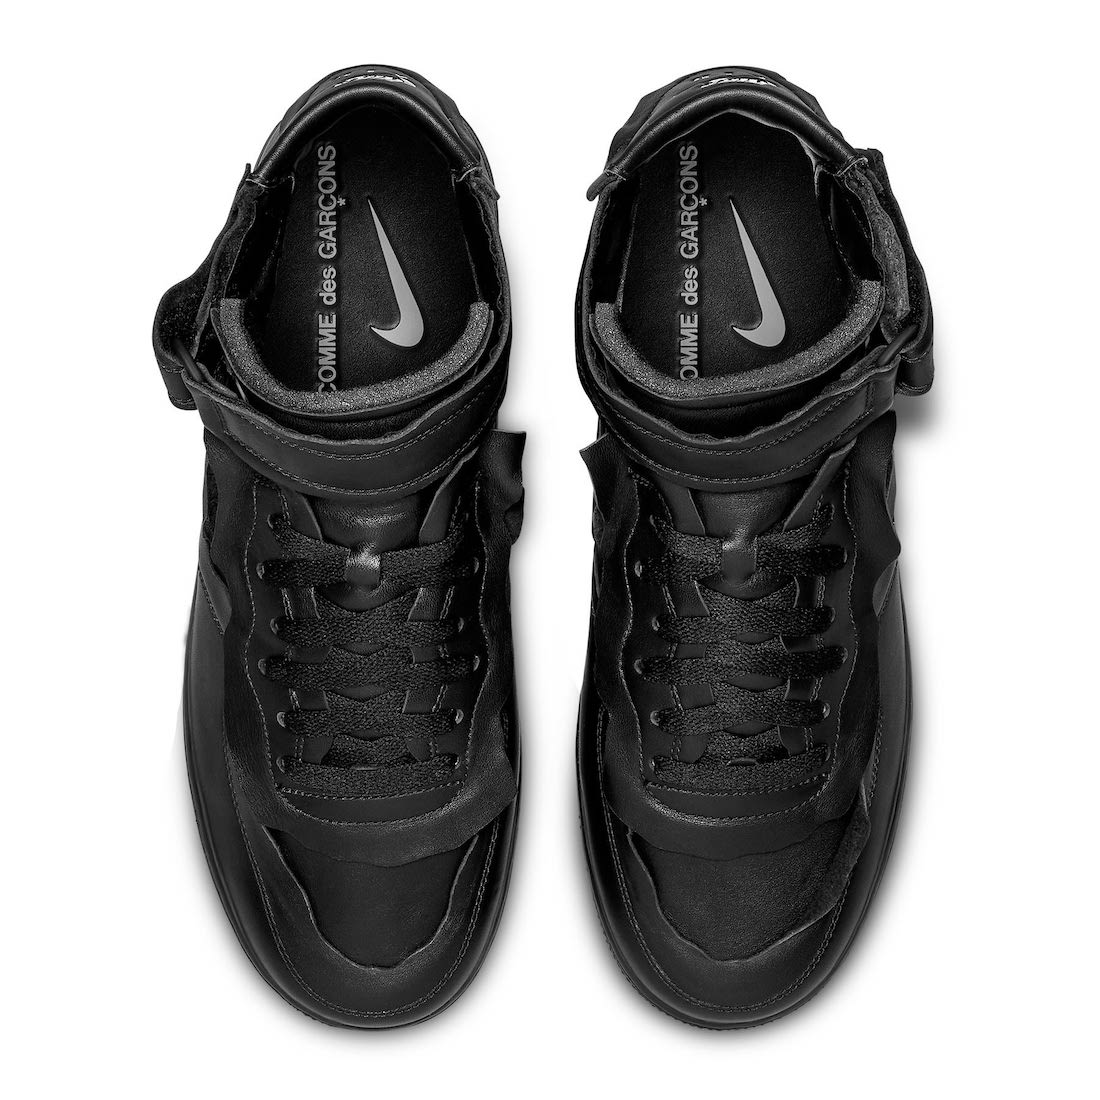 Comme des Garcons Nike Air Force 1 Mid Black Release Date